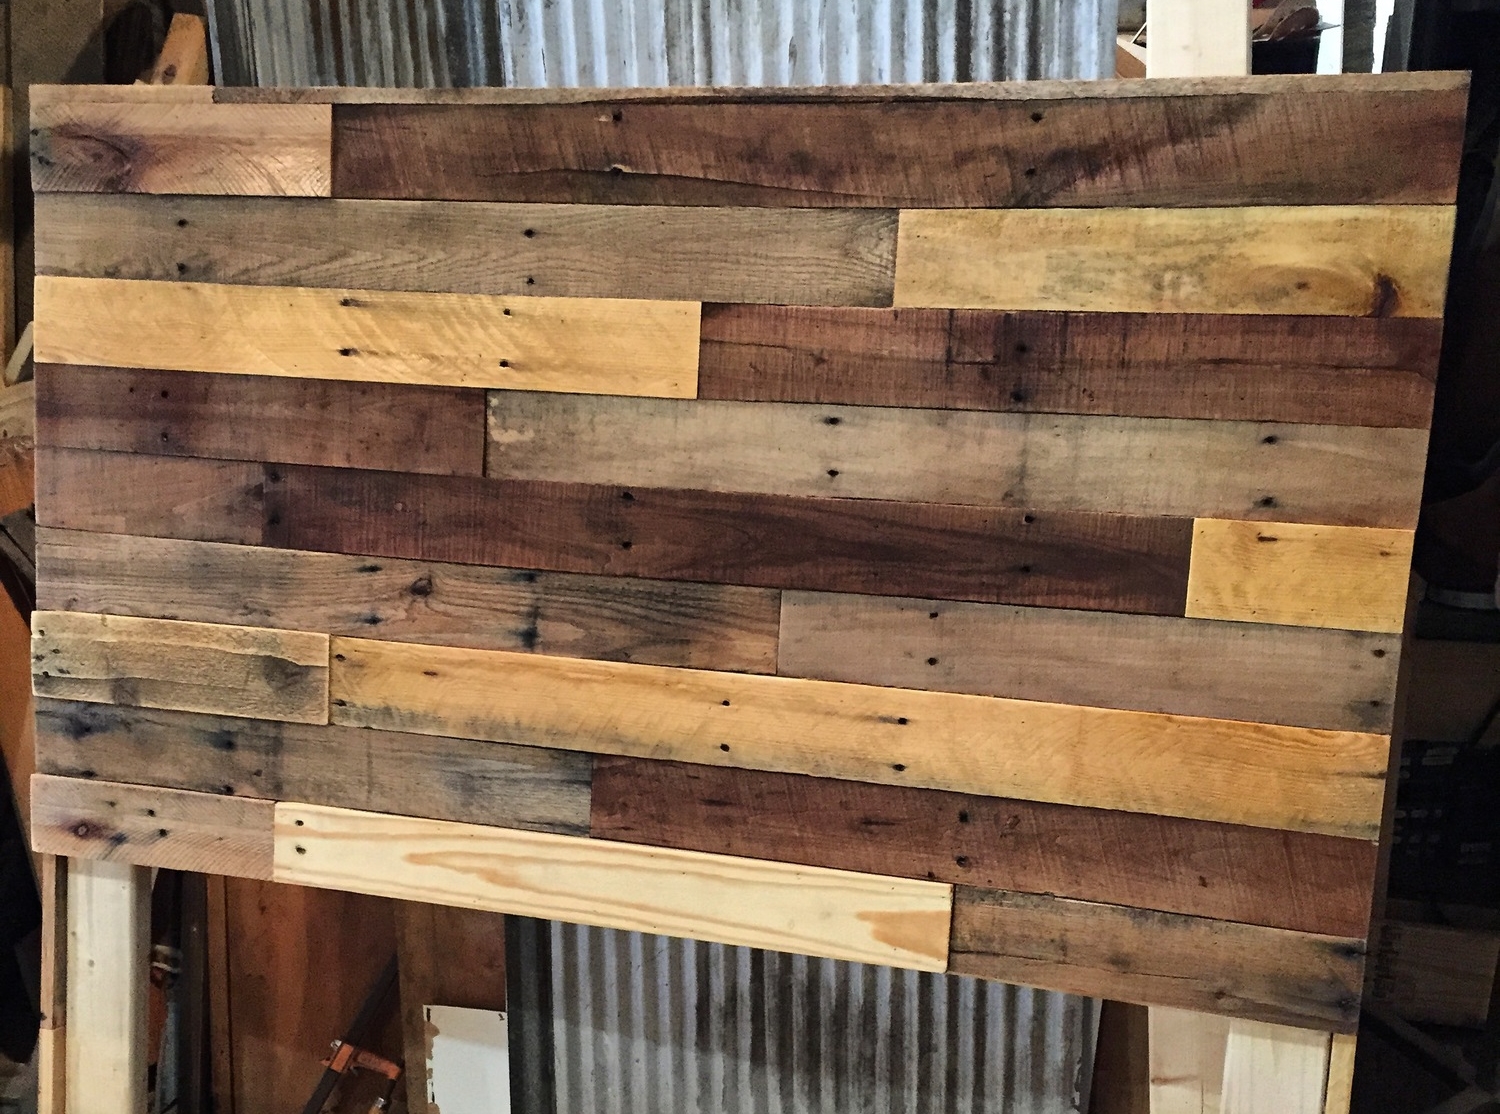 Pallet Wood Headboard Diy Revival, How To Build A Bed Frame Out Of Pallets